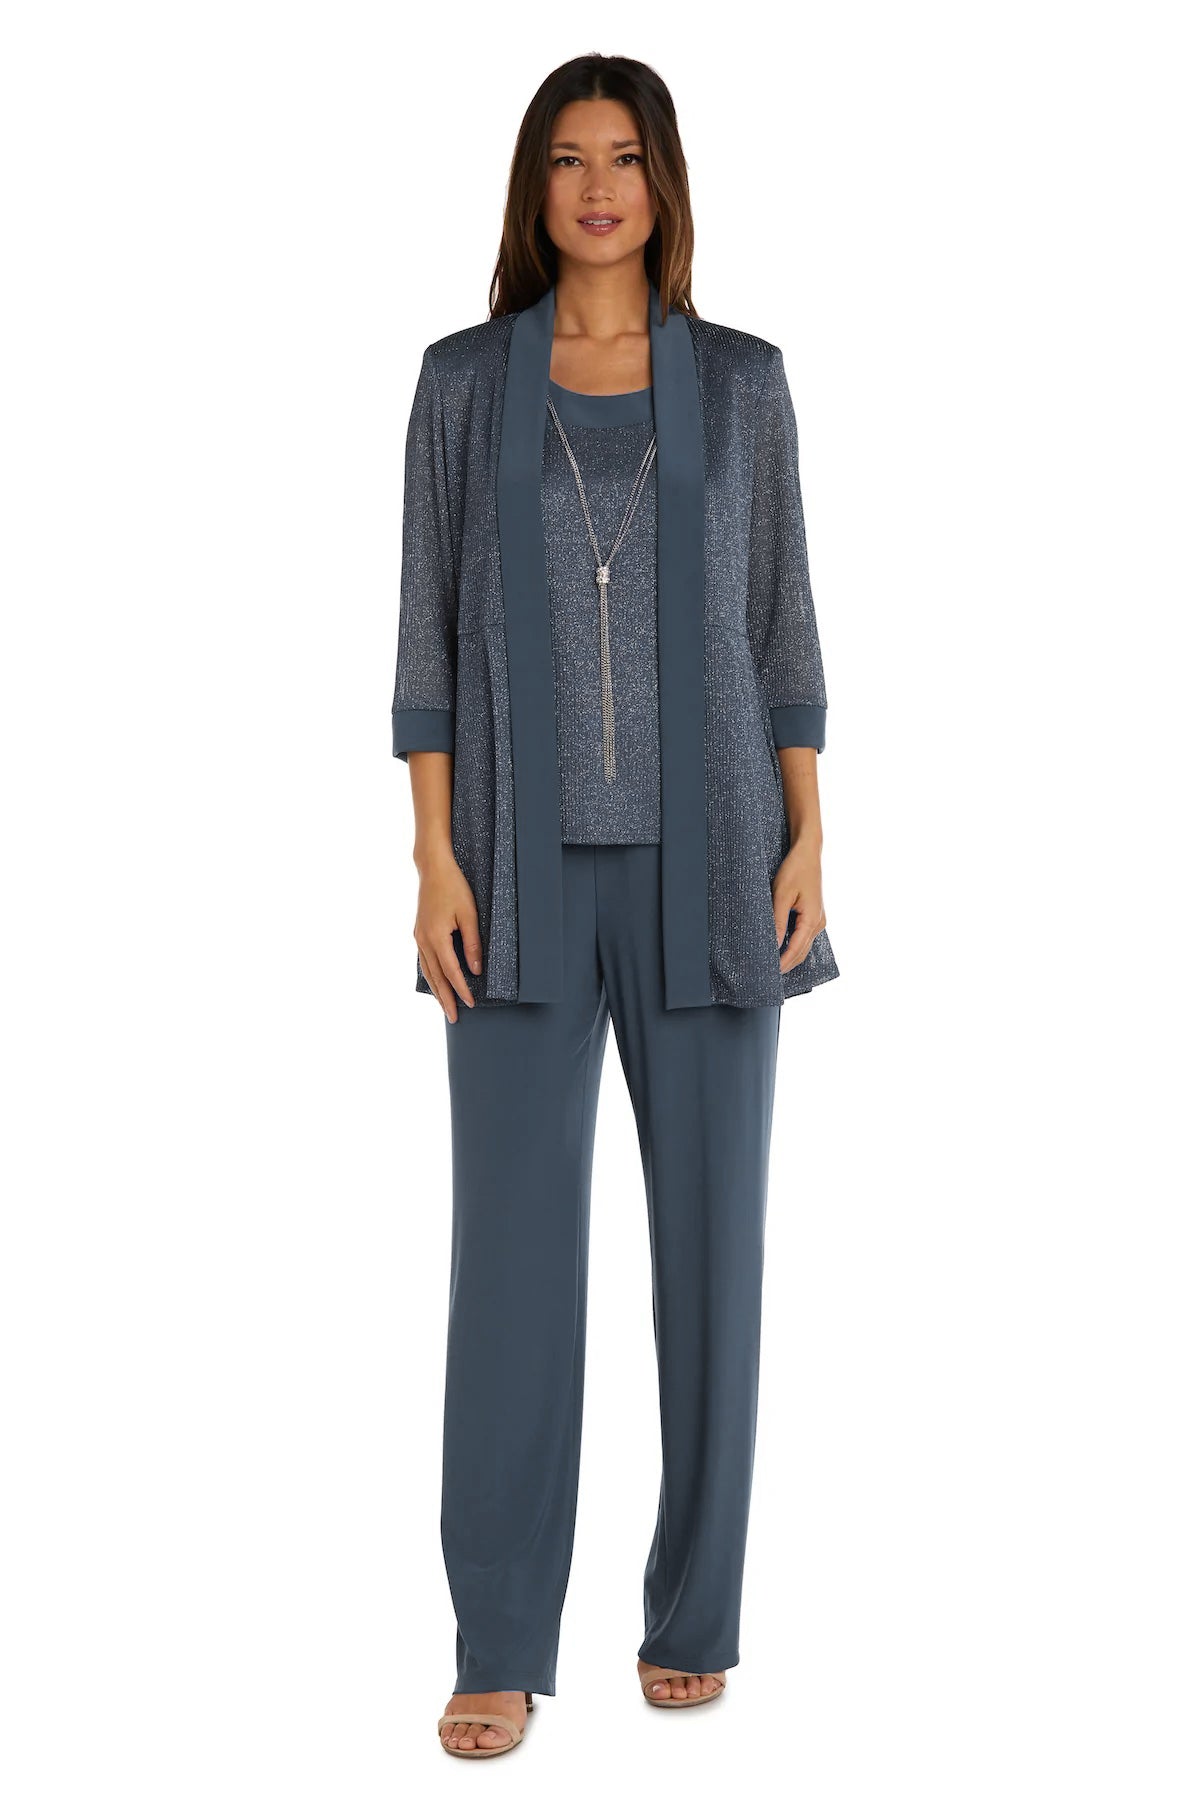 Blue Petite Dressy Pant Suits and Sets  Dressy pant suits, Dressy pants  outfits, Dressy pants